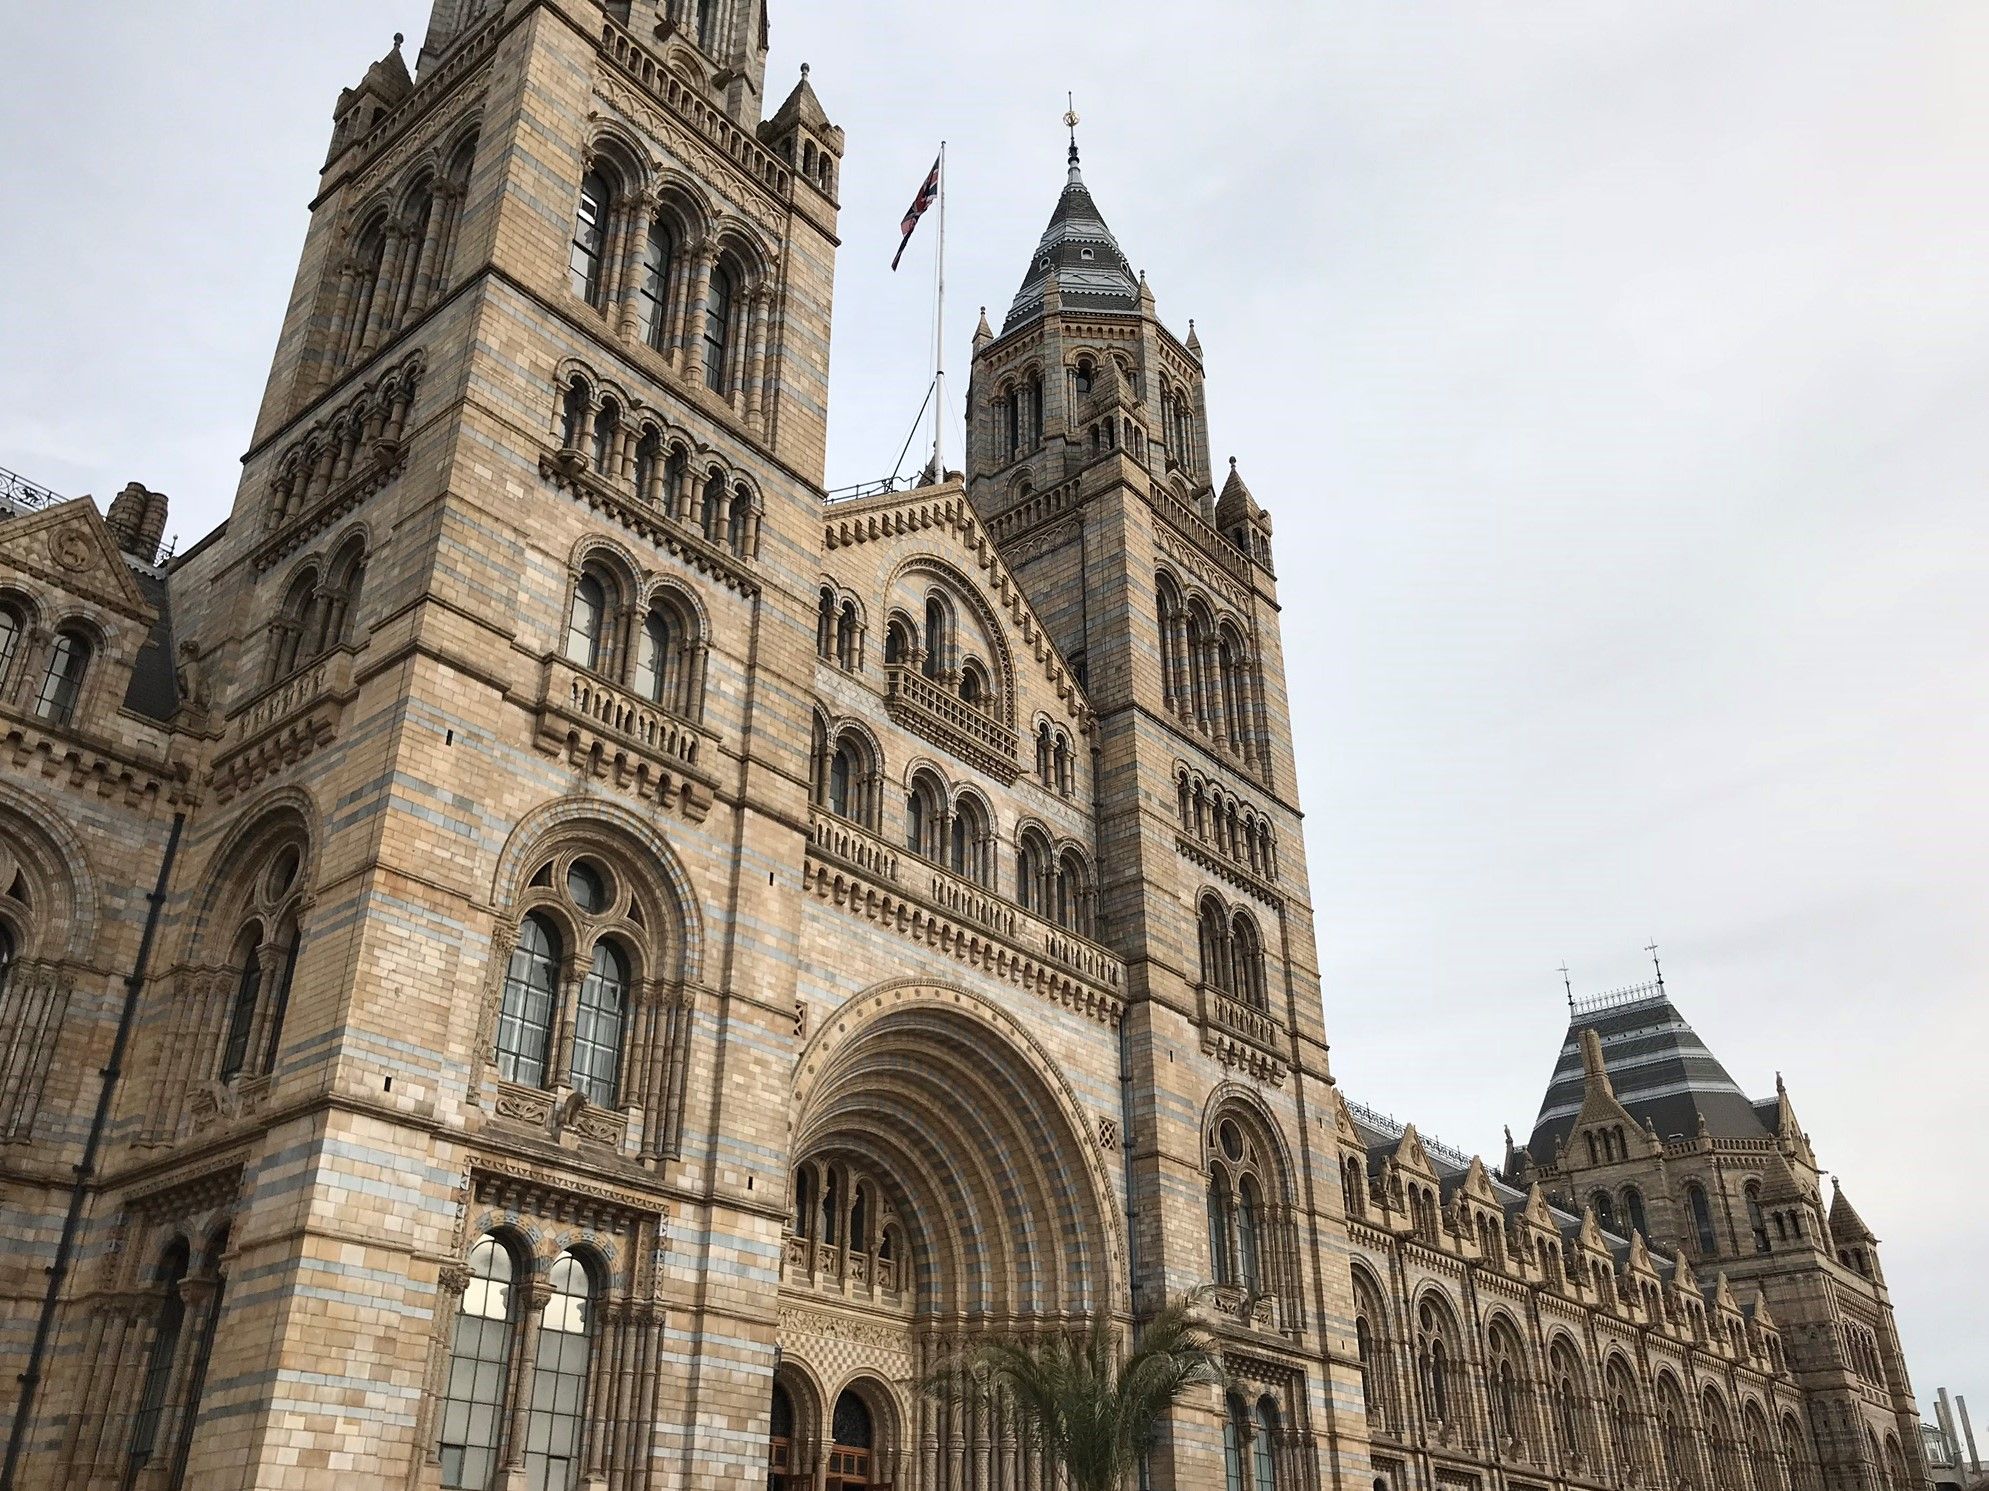 The entrance of the Natural History Museum